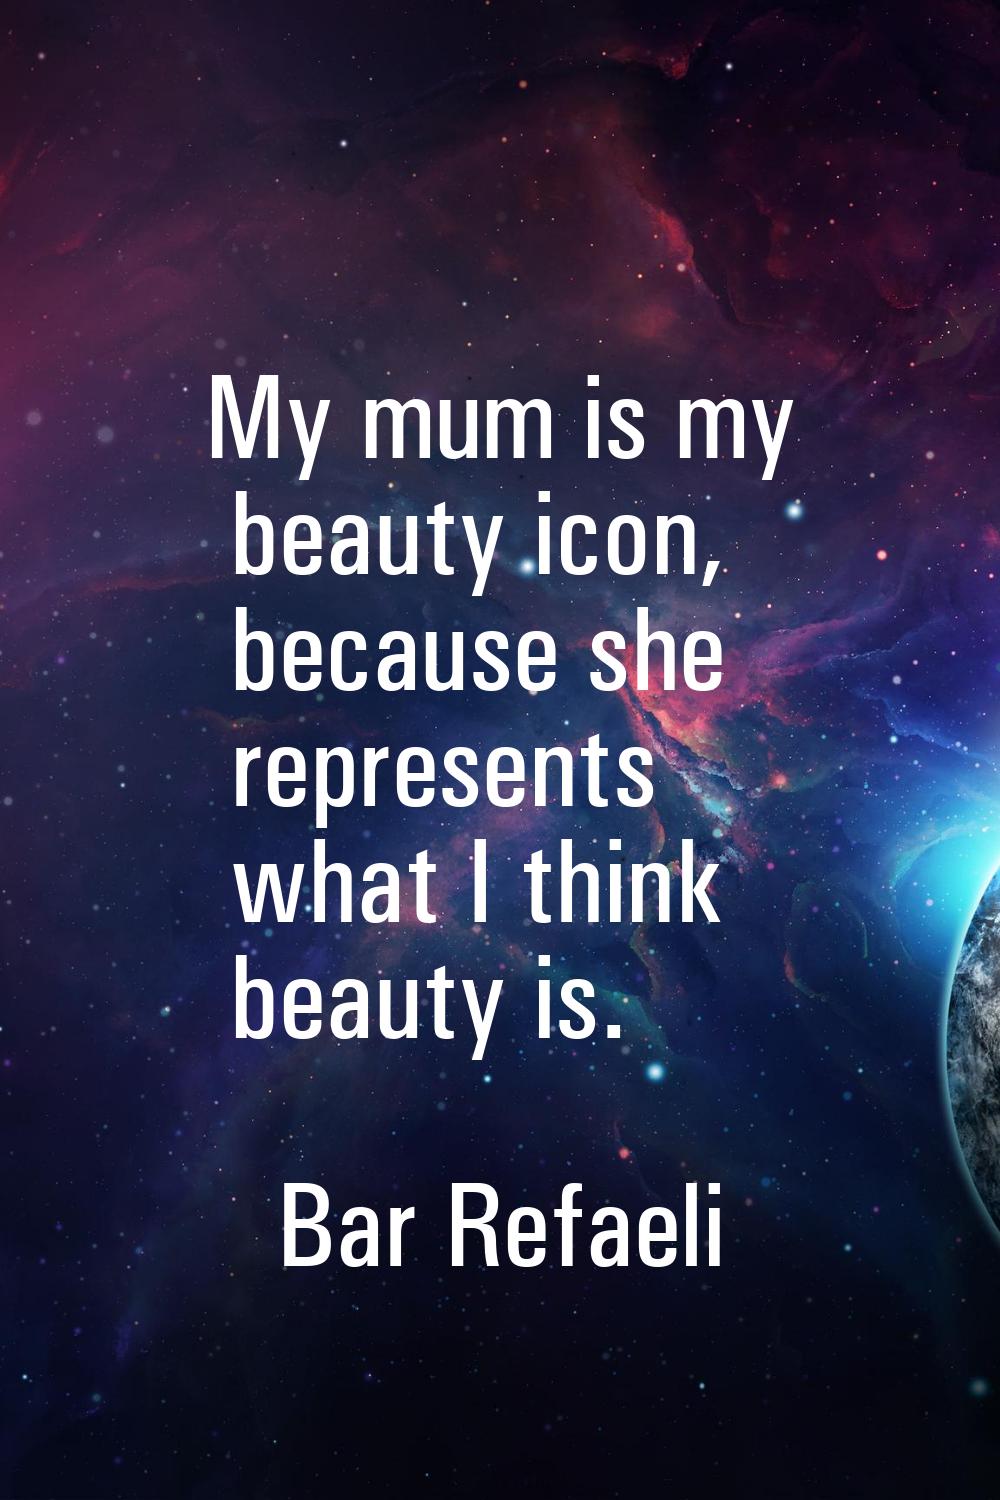 My mum is my beauty icon, because she represents what I think beauty is.